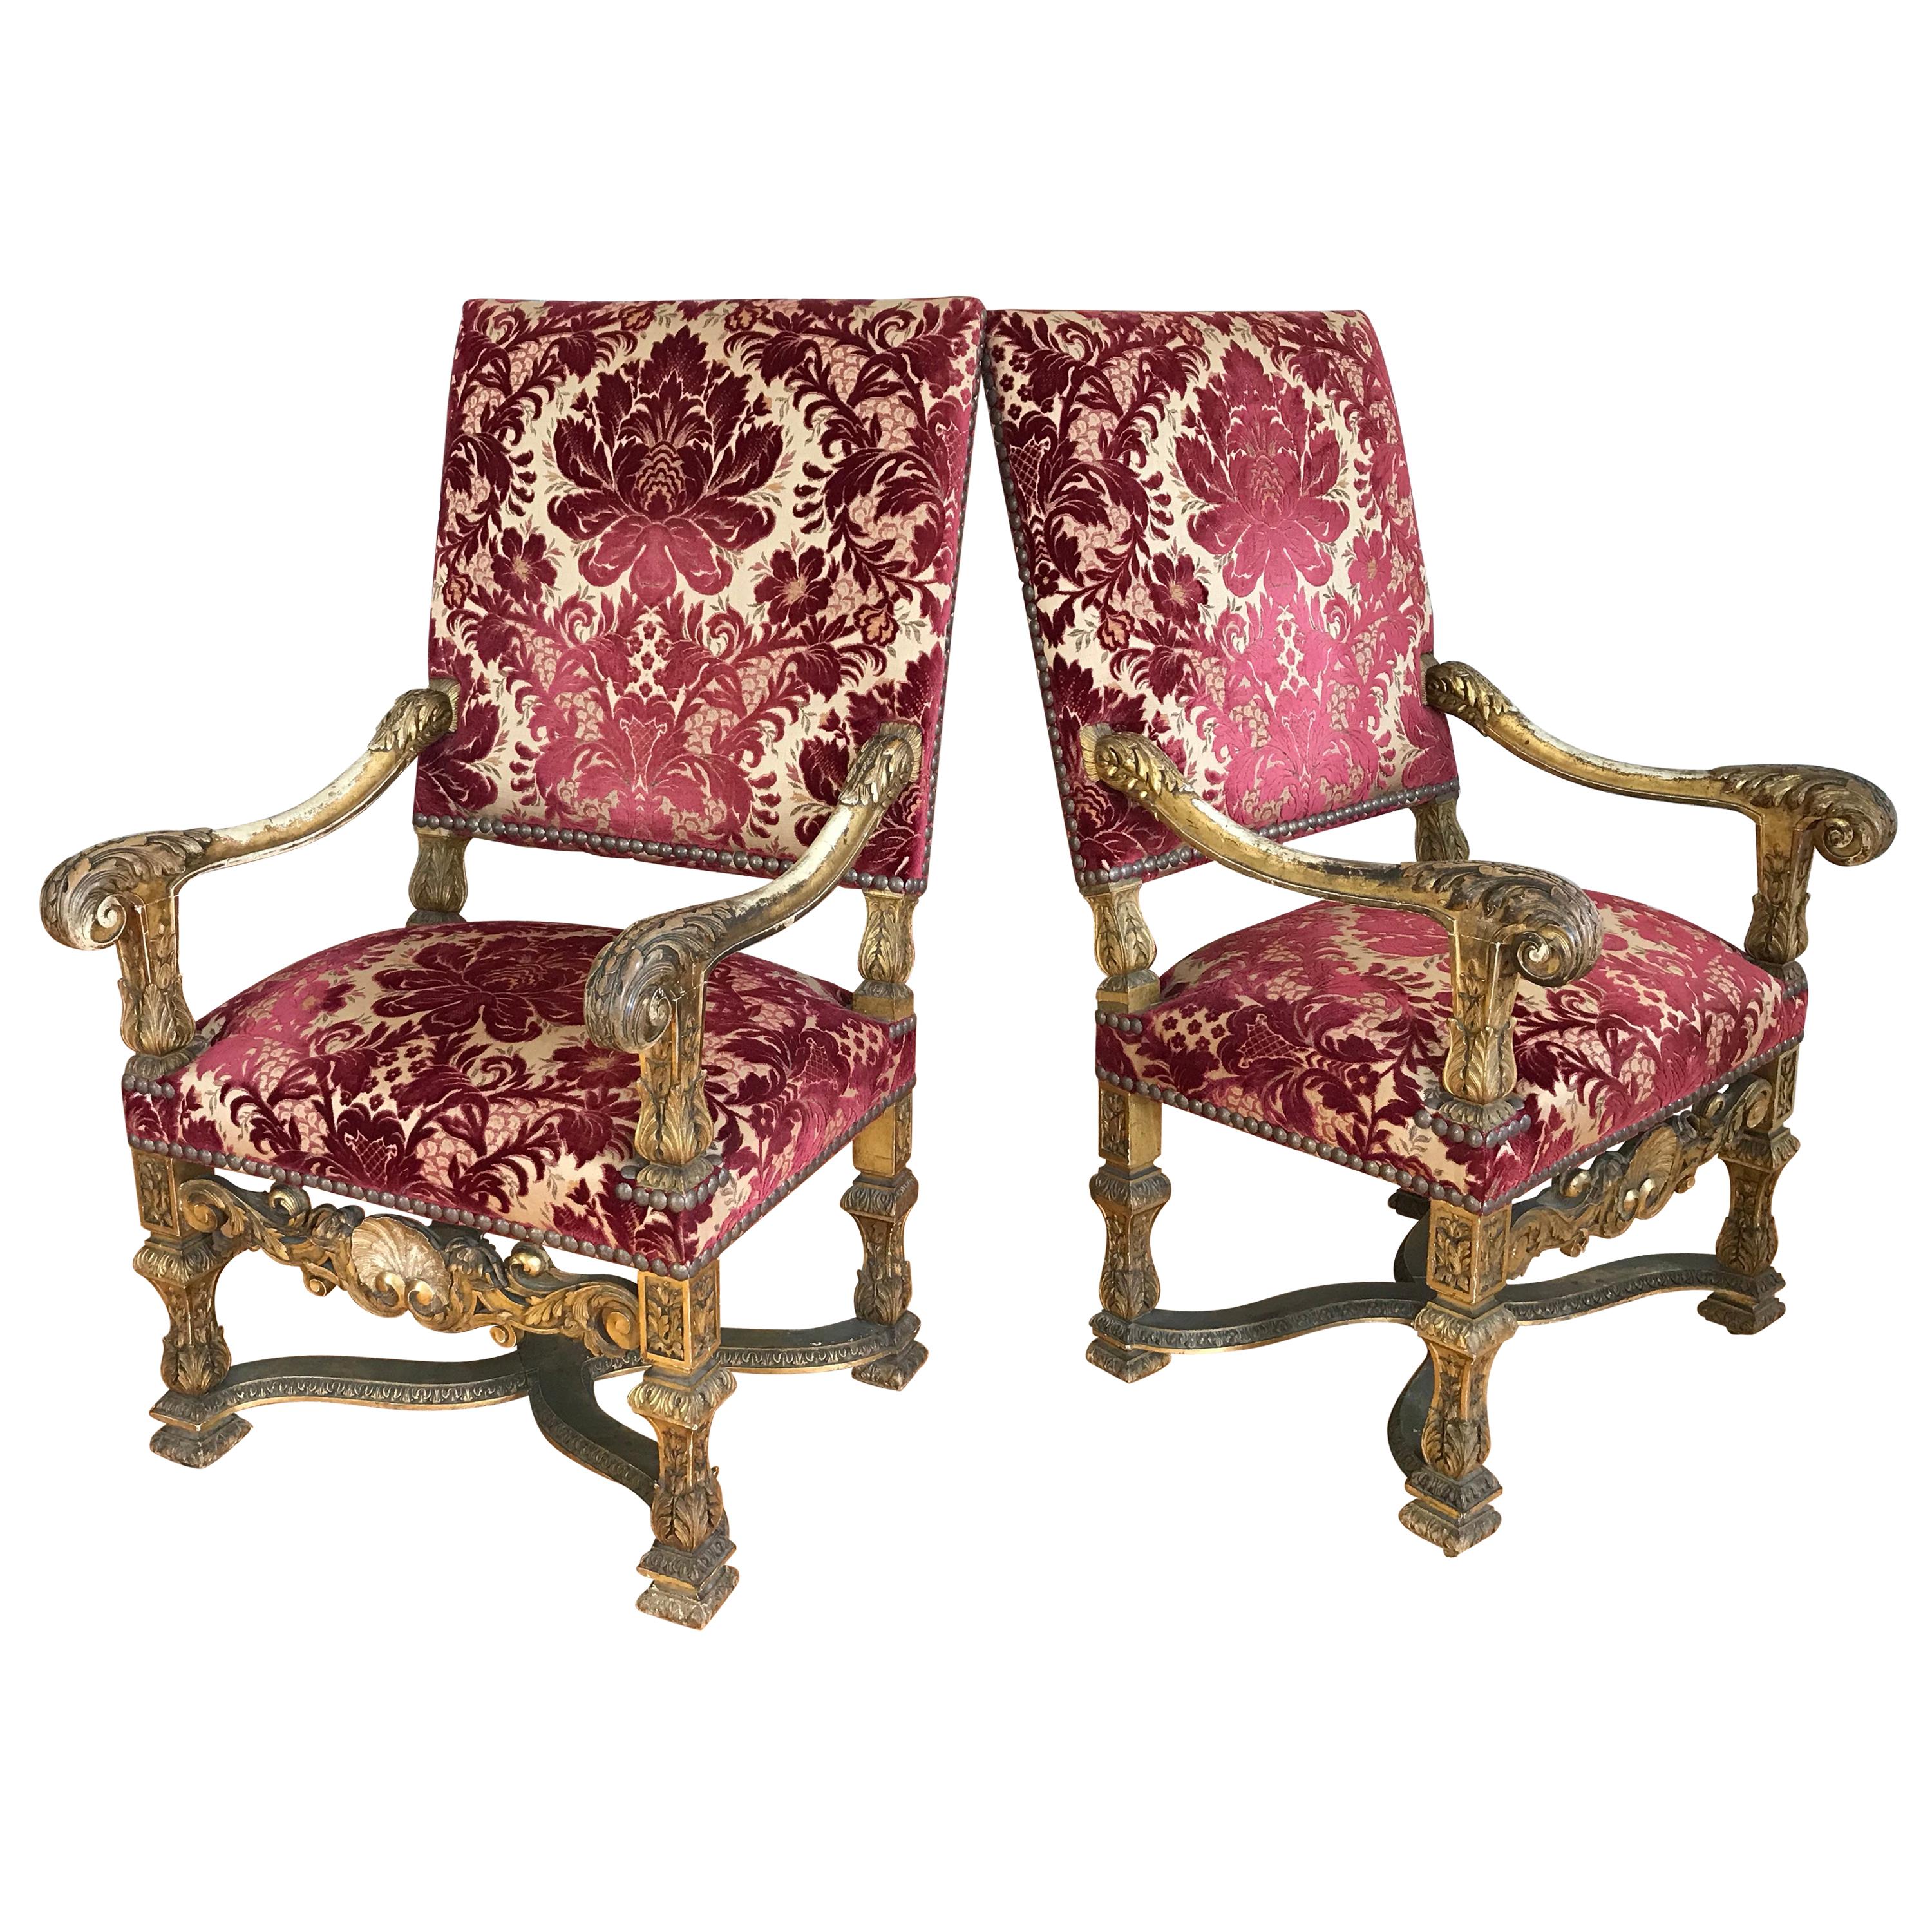 Pair of Giltwood Regence Style Armchairs